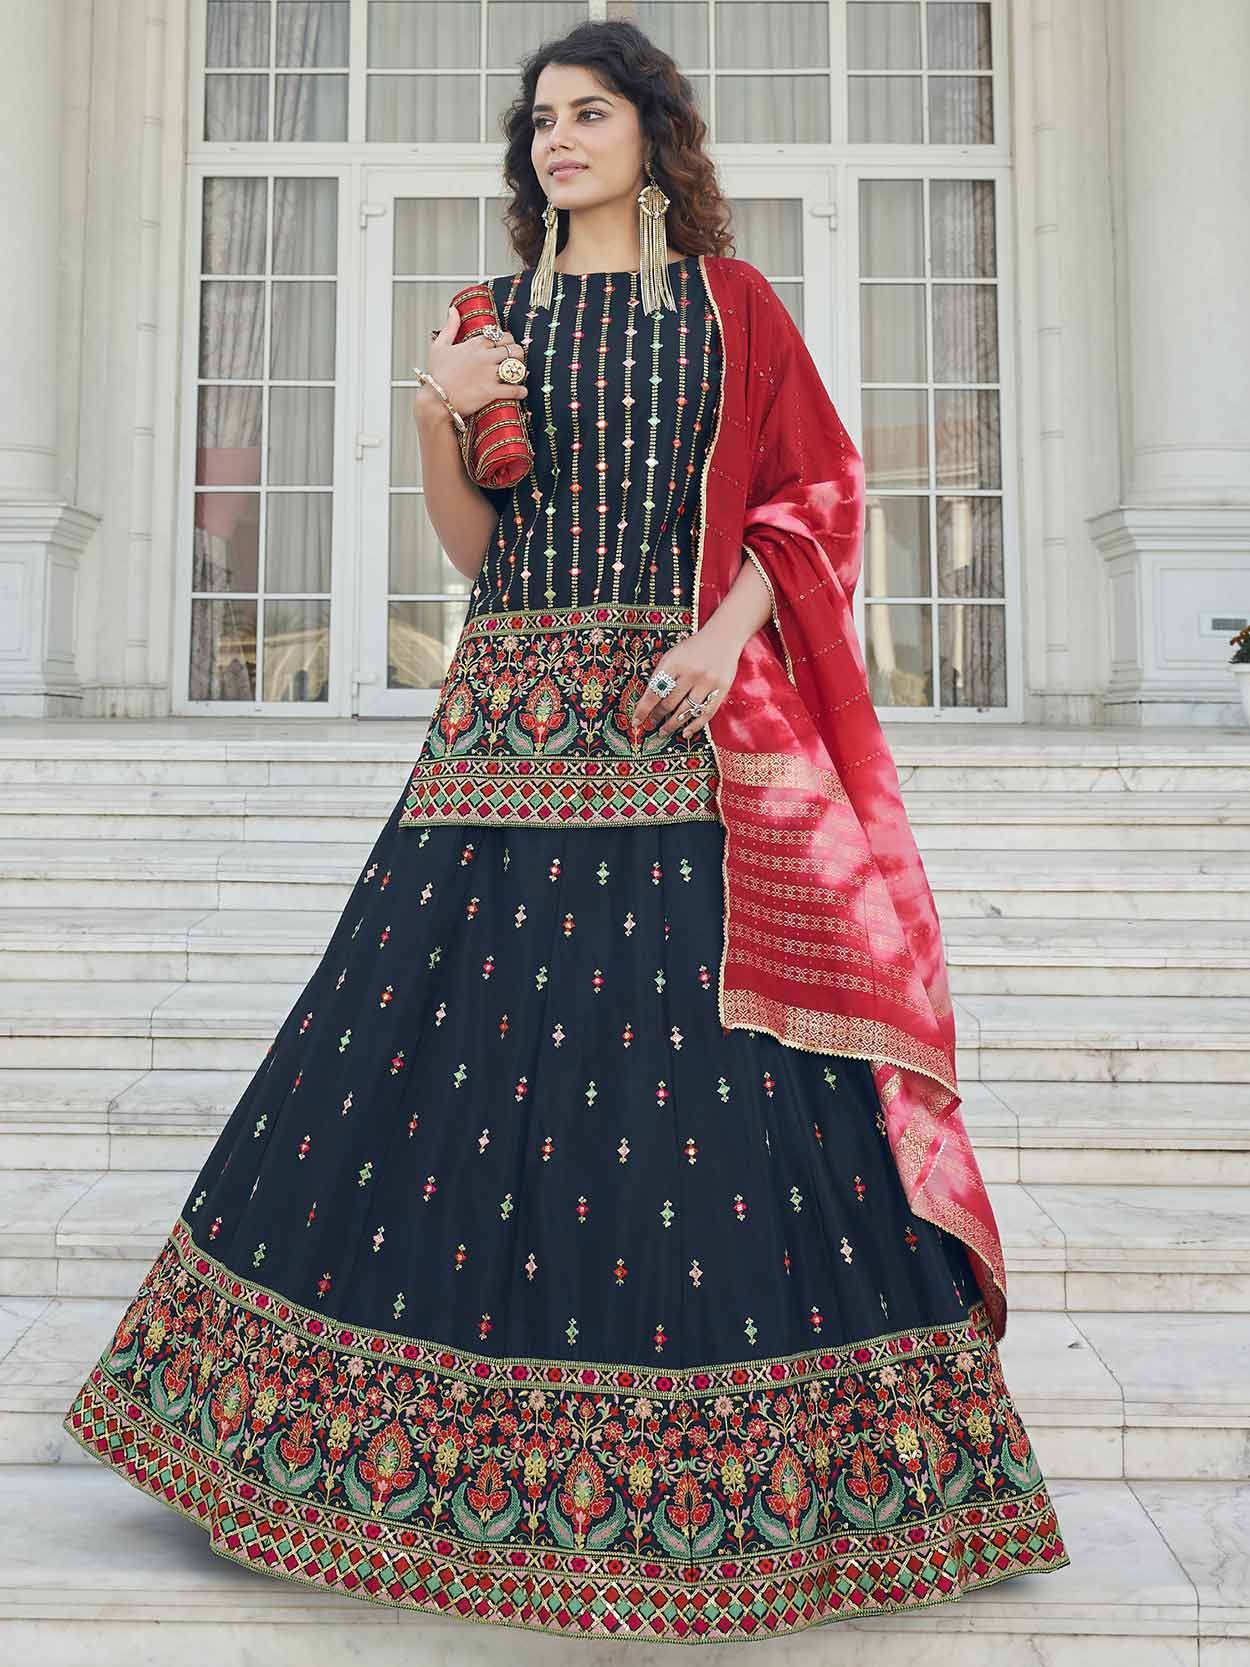 Top 83+ traditional look in kurti latest - thtantai2